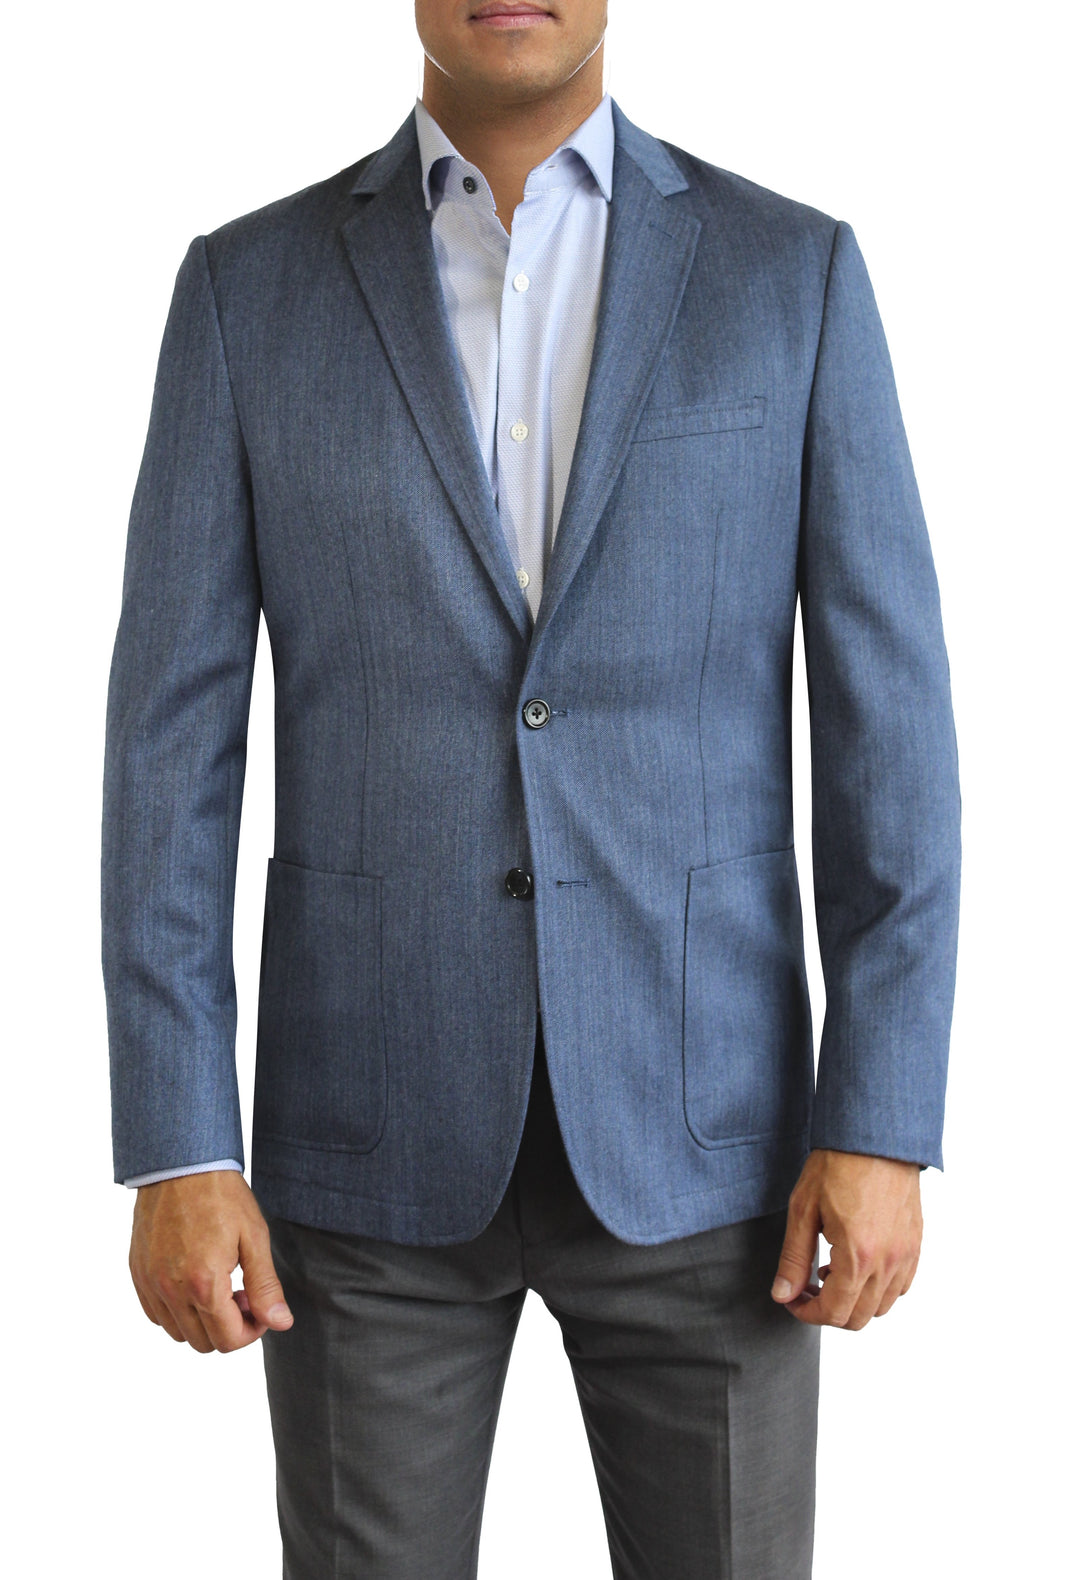 Blue Heather two button jacket by Daniel Hechter